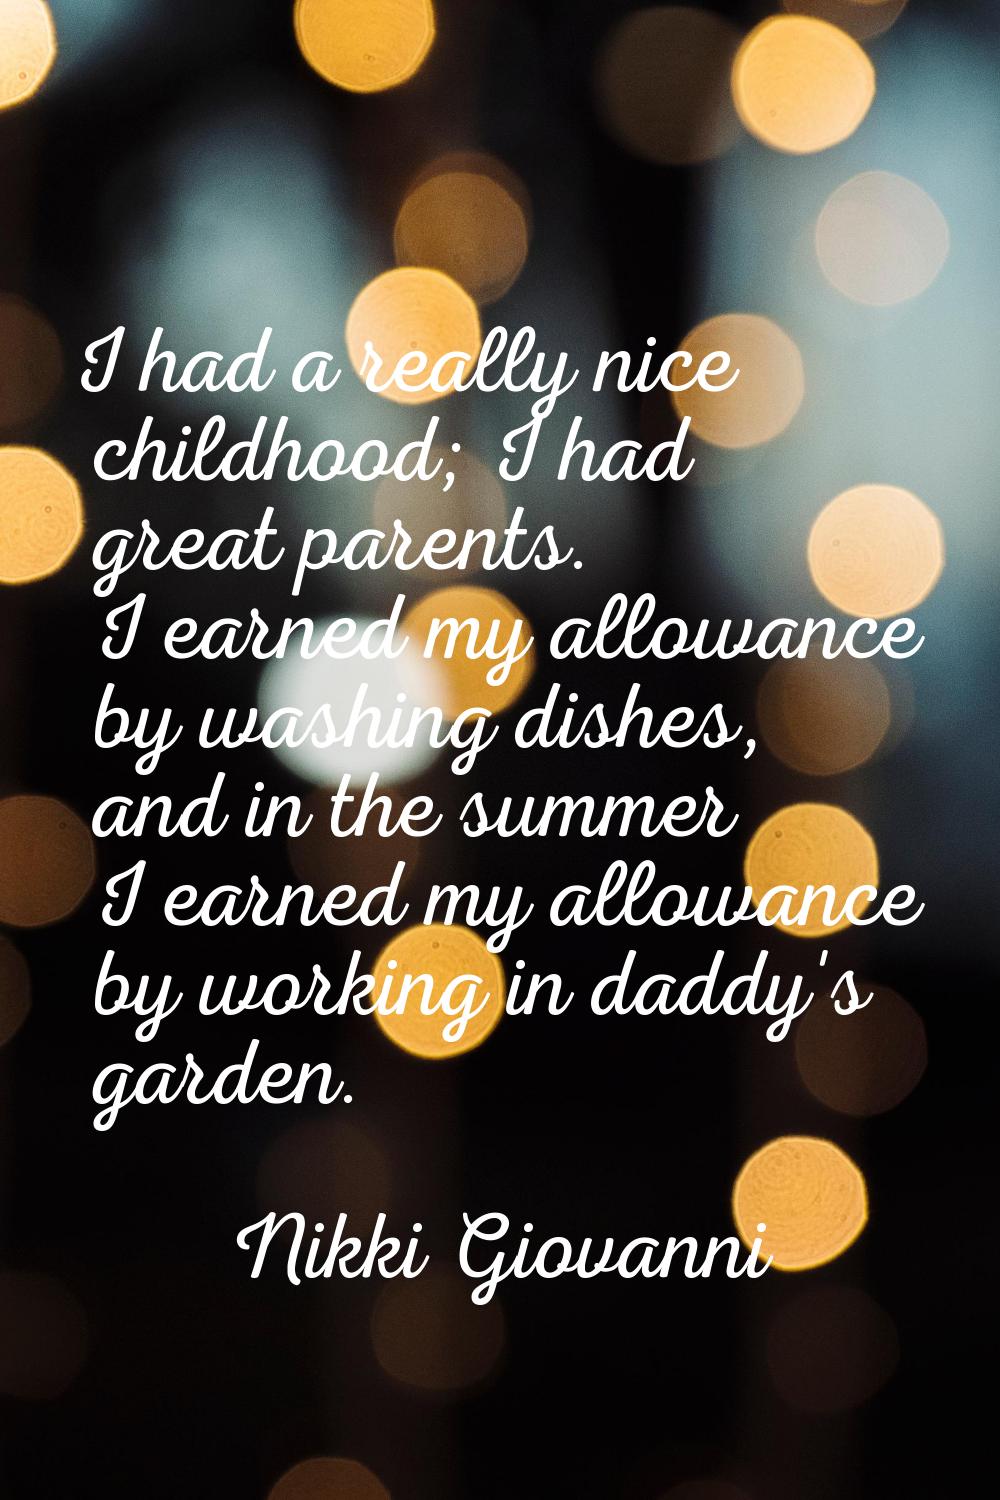 I had a really nice childhood; I had great parents. I earned my allowance by washing dishes, and in